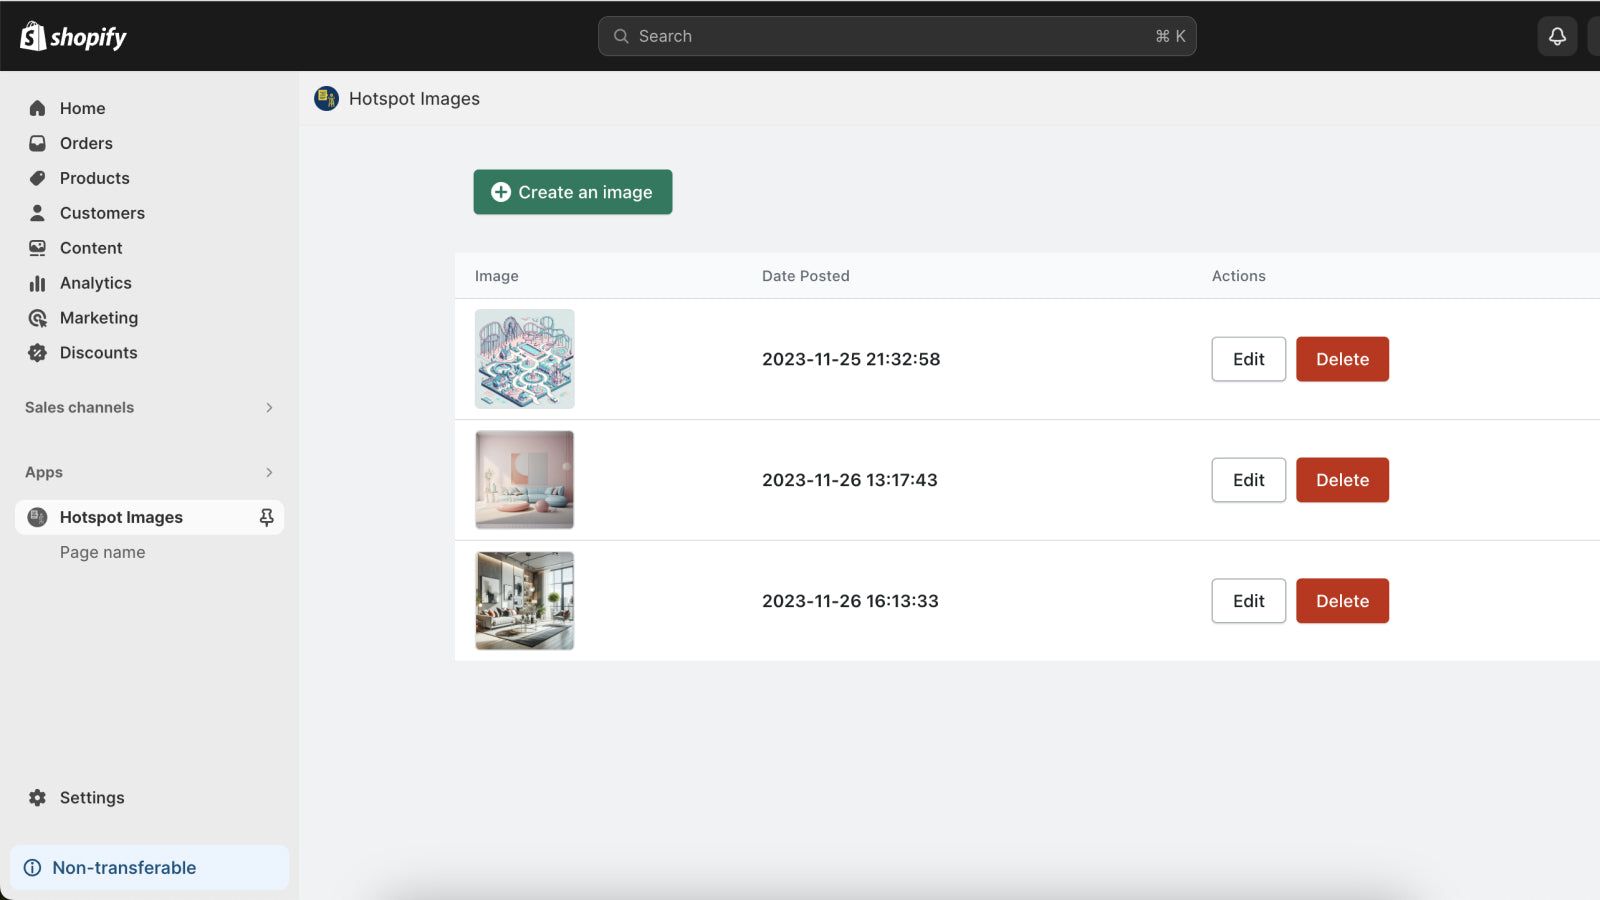 Manage Your Interactive Images With Your Store